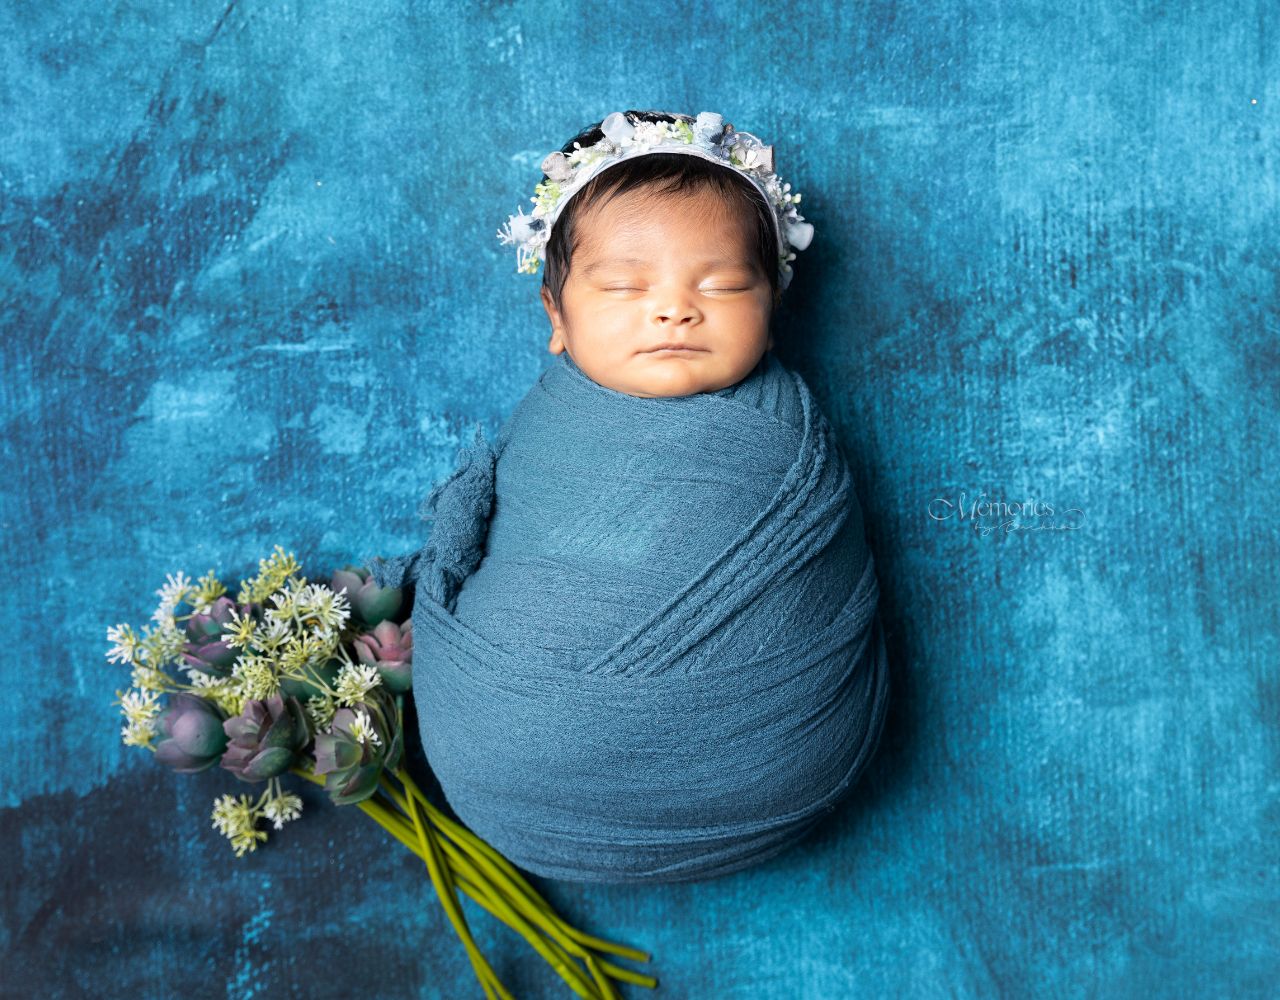 The Art of Posing: Positioning Newborns for Adorable Shots